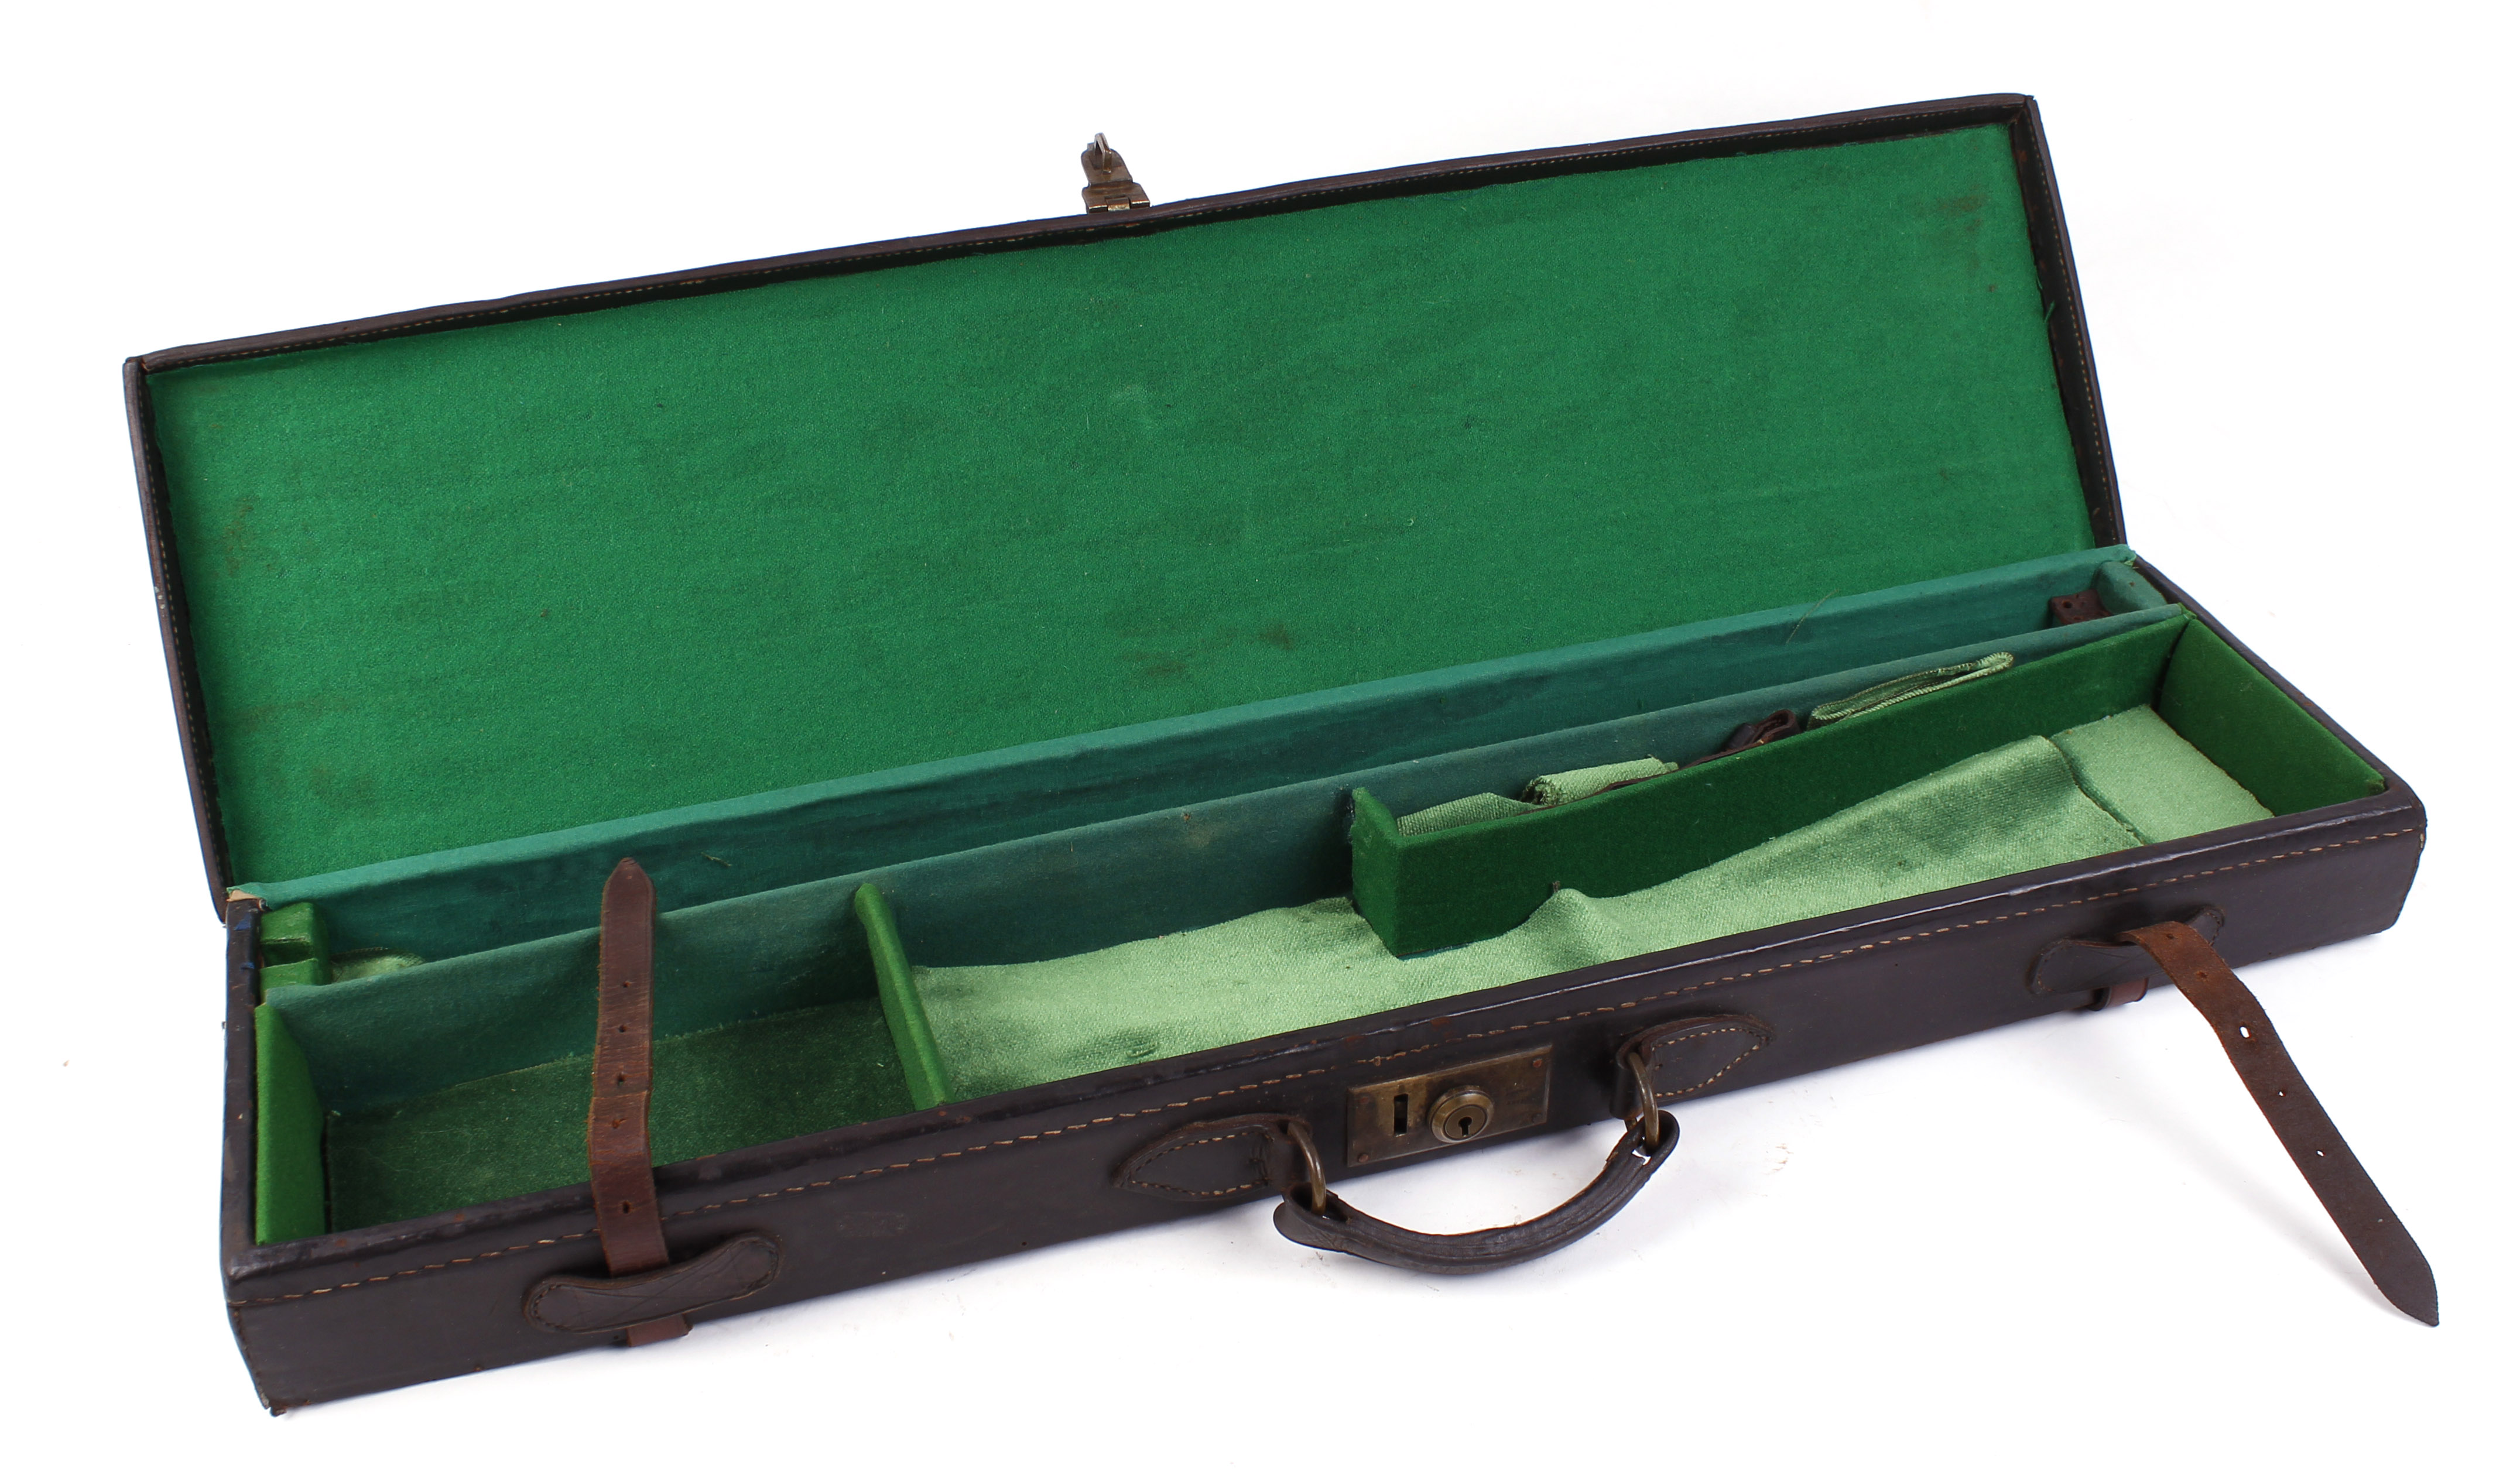 Black leather gun case, brown straps not original, green baize lined interior fitted for up to 30